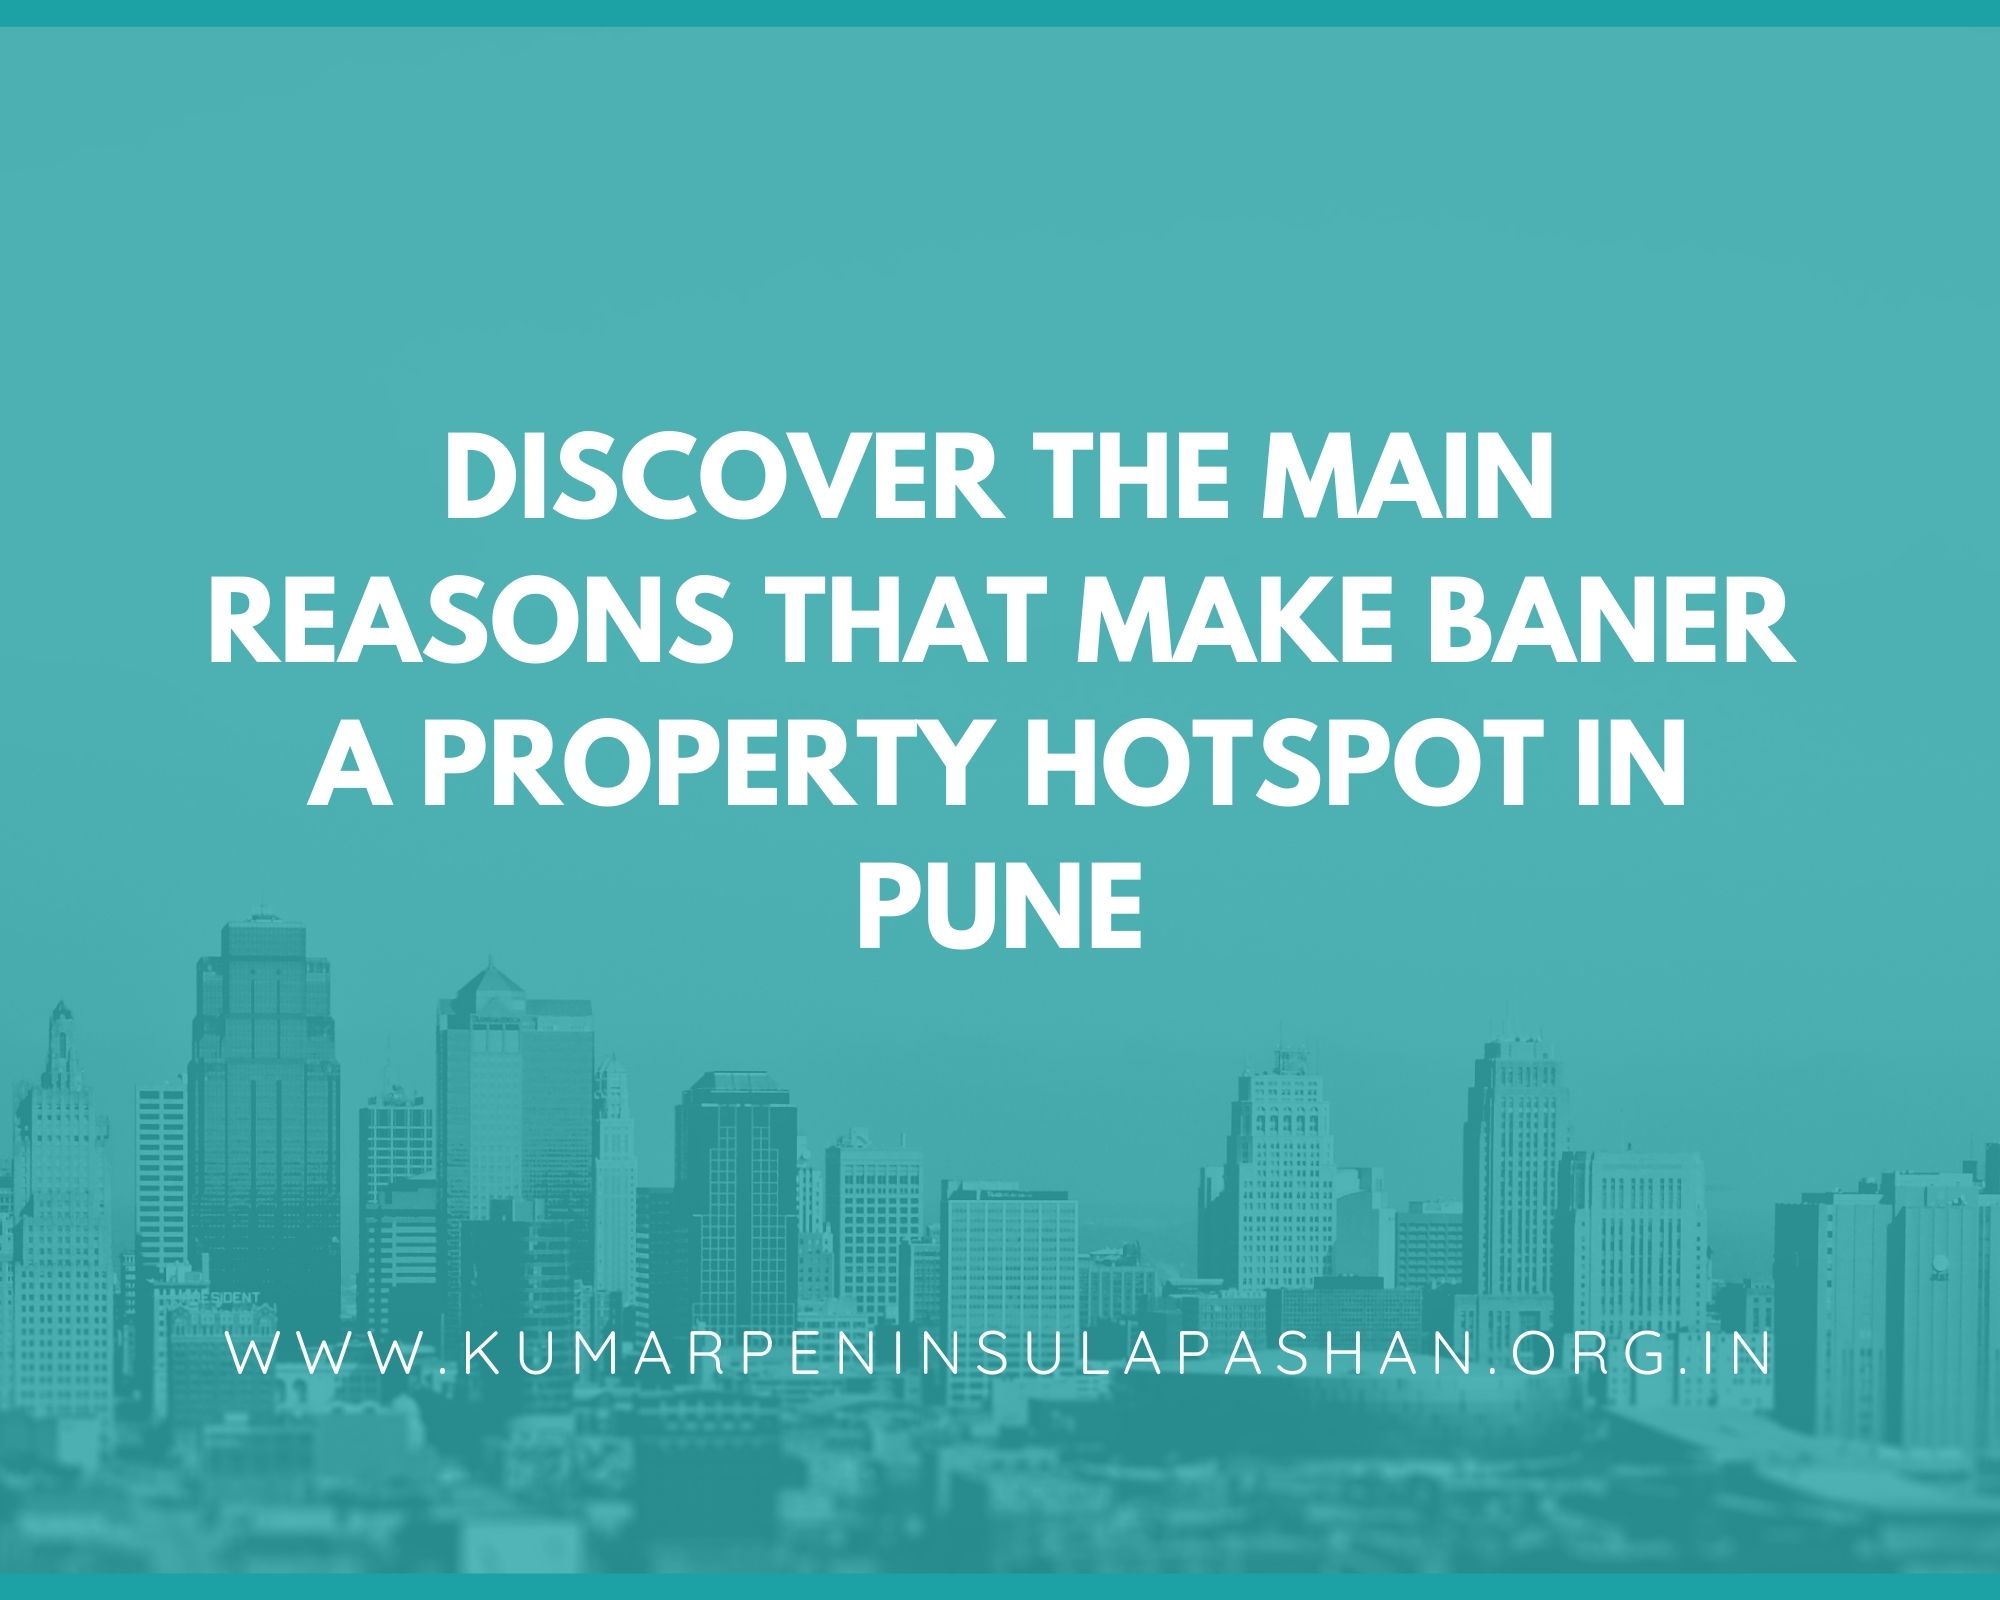 Discover the main reasons that make Baner a property hotspot in Pune